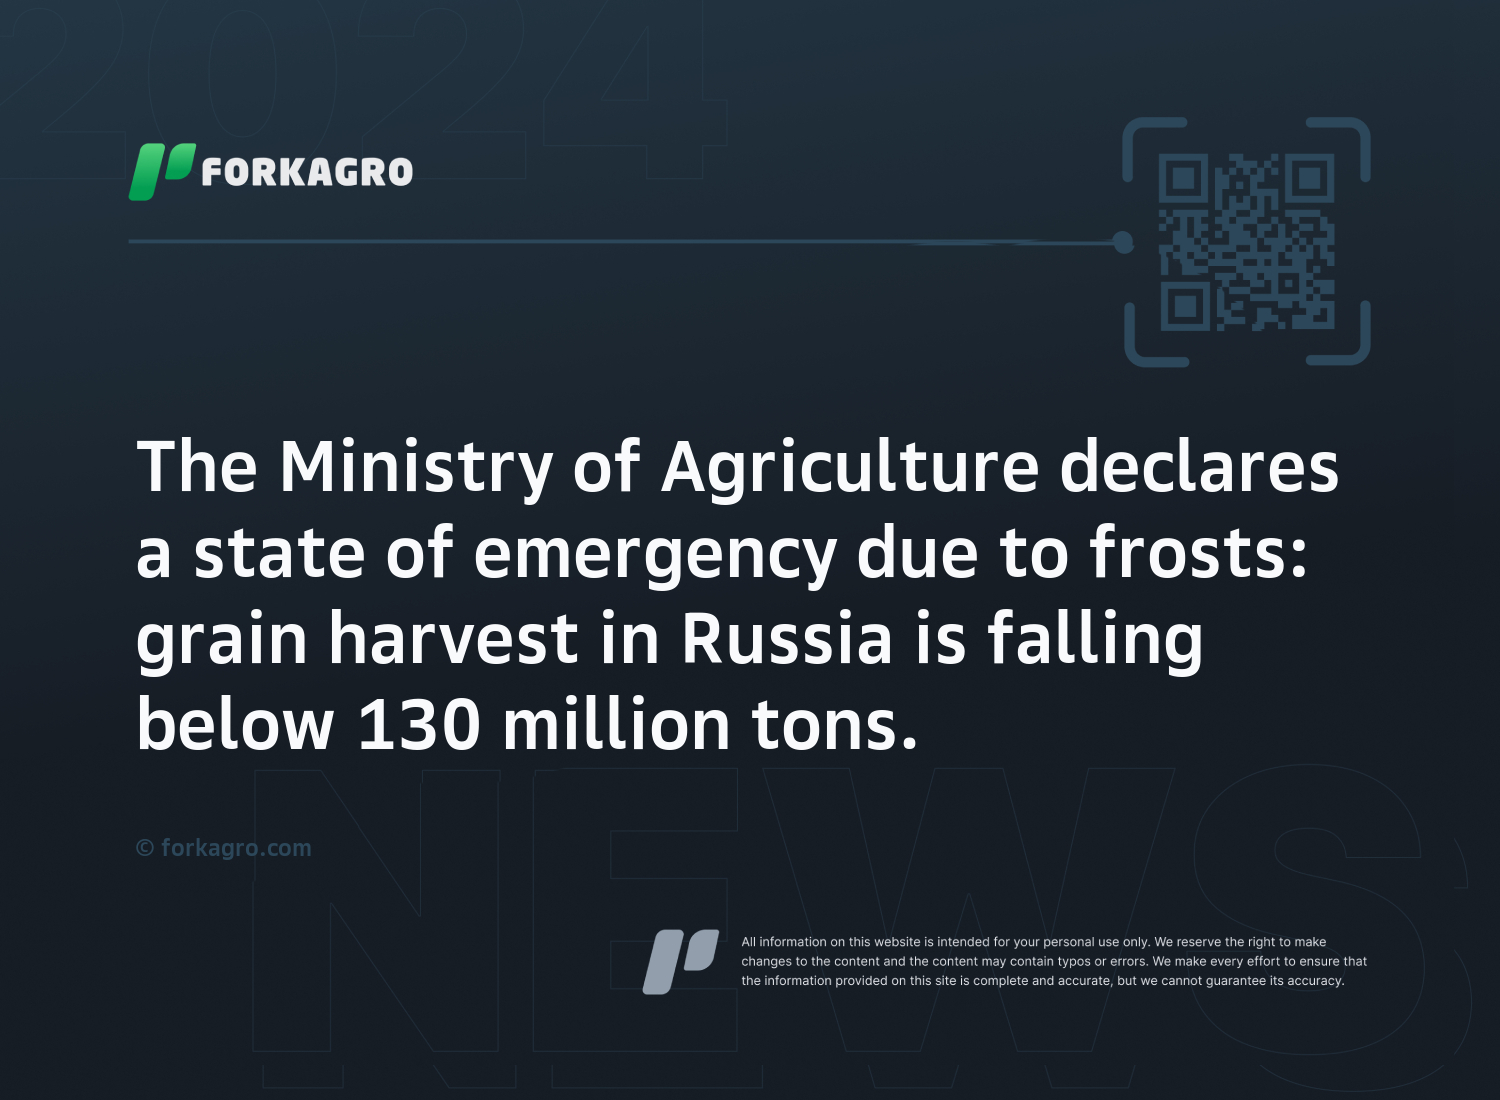 The Ministry of Agriculture declares a state of emergency due to frosts: grain harvest in Russia is falling below 130 million tons.